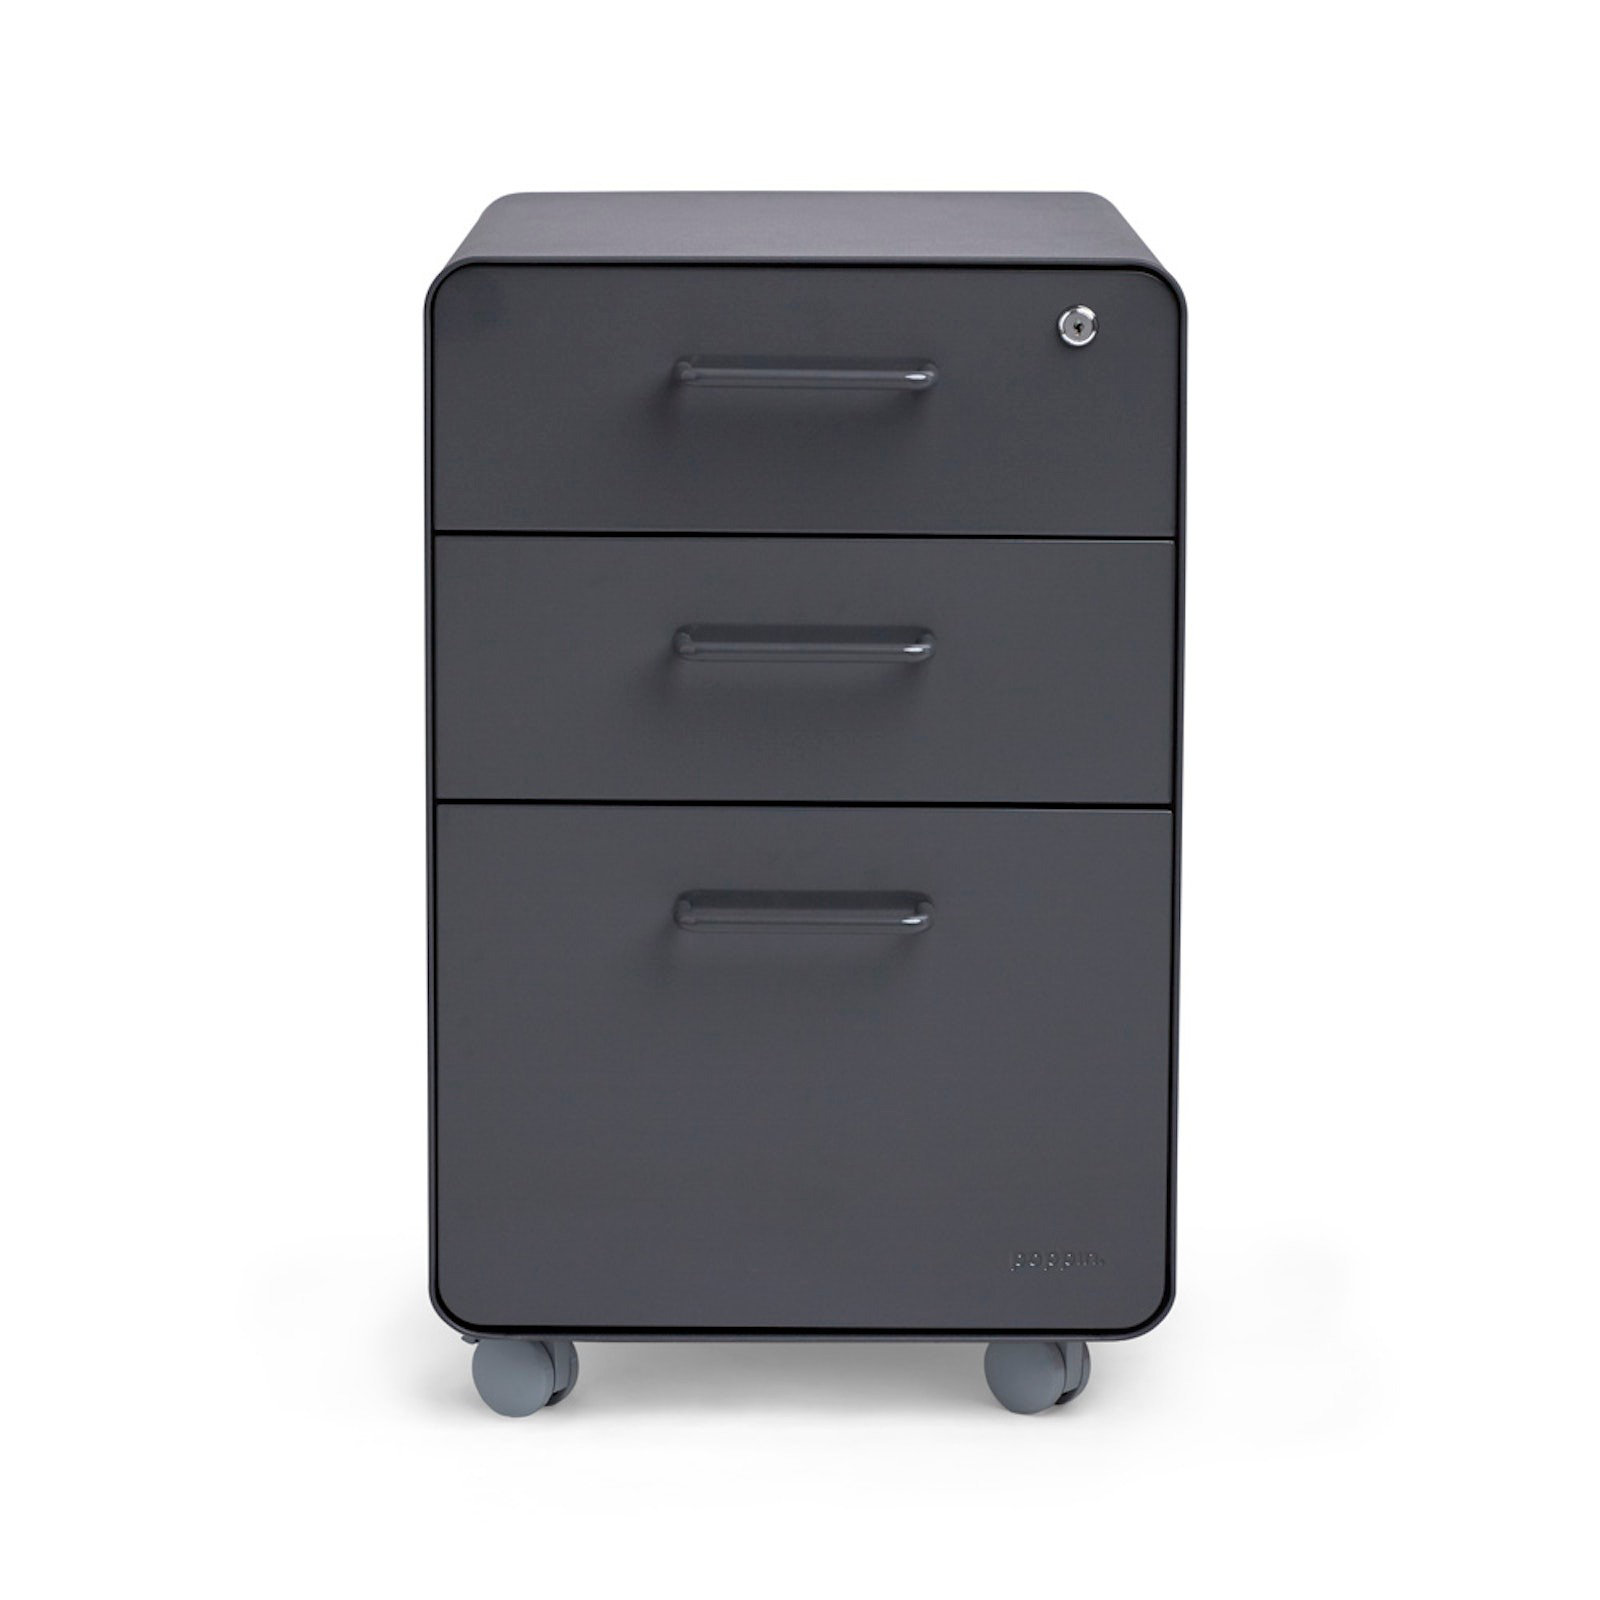 Wood Filing Cabinet for Home and Office 3 Drawer Small Rolling File Cabinet  with Locked - China Filing Cabinet, Home Office Furniture